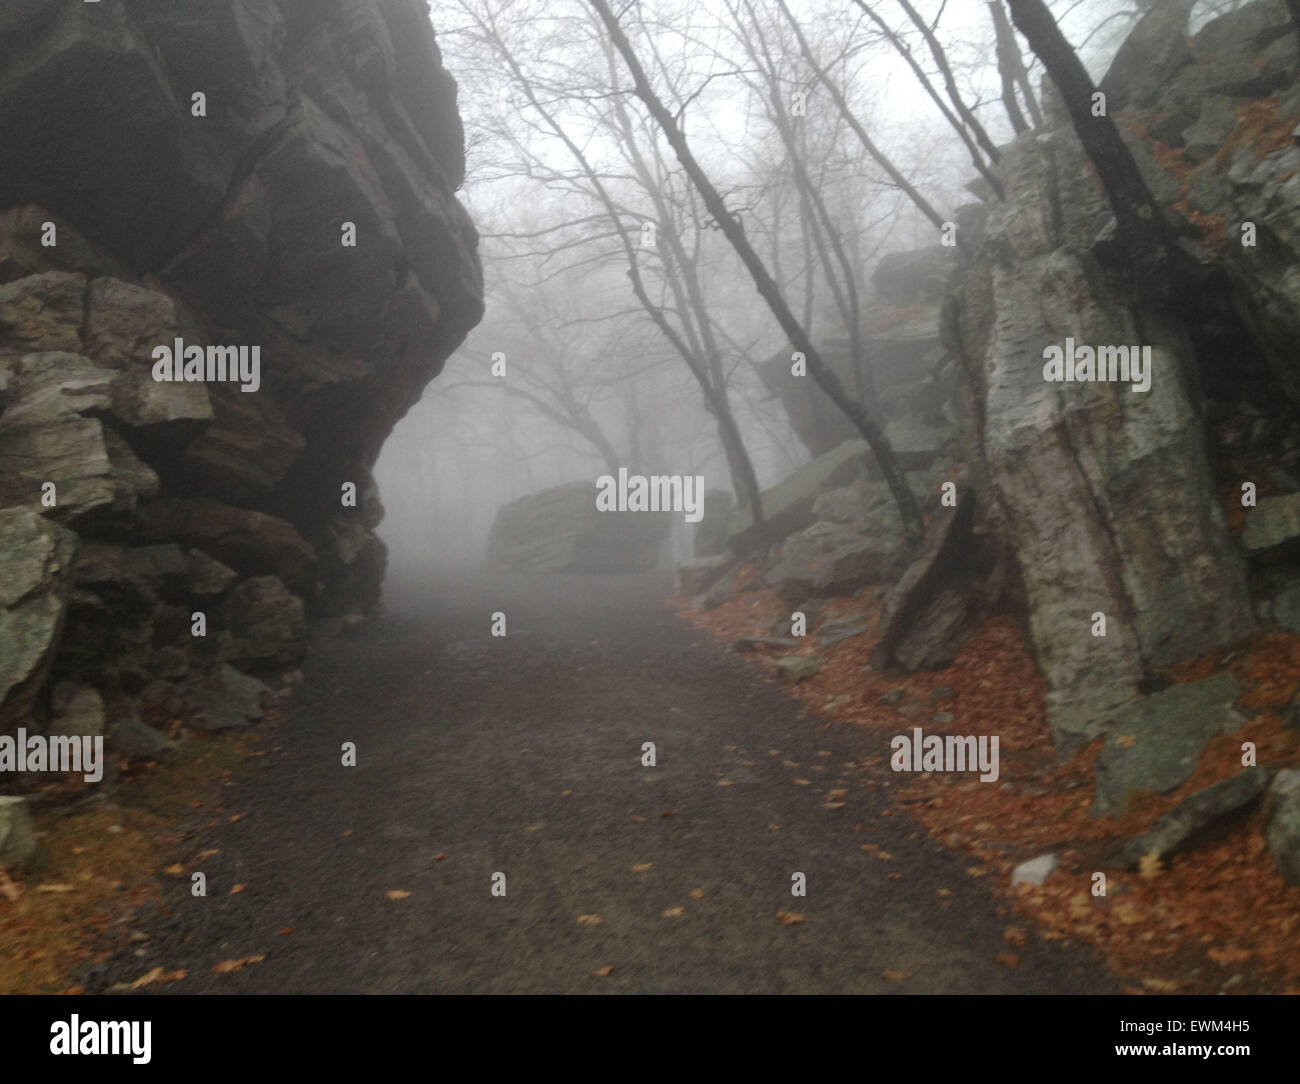 Undercliff Trail in the Trapps climbing area ('The Gunks') in the Mohonk Preserve in upstate New York. Stock Photo